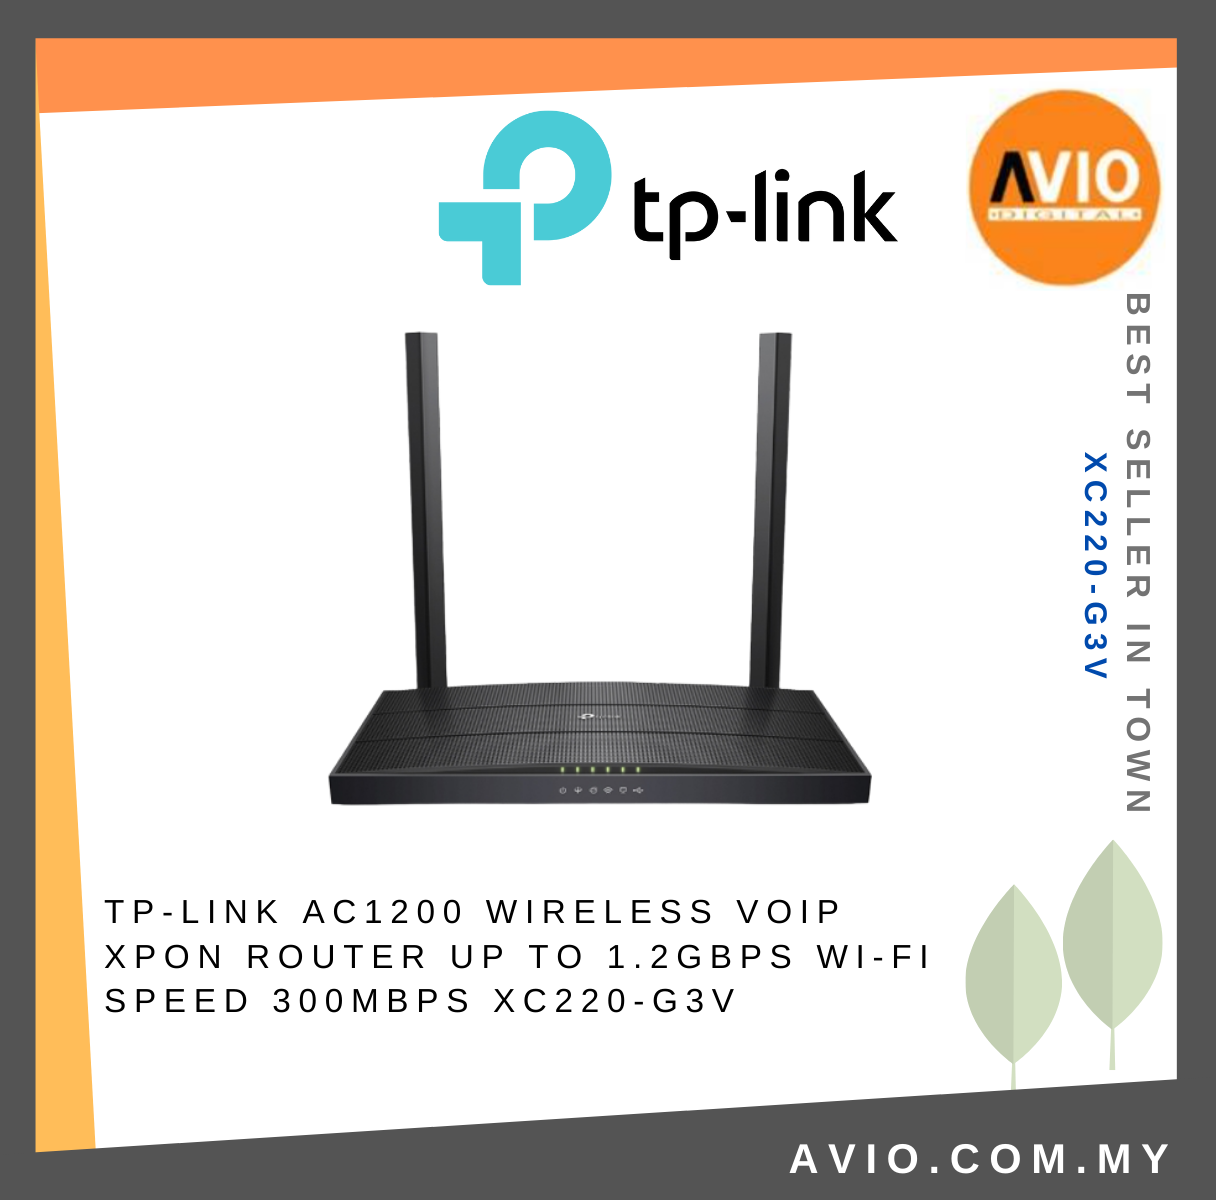 TP LINK AC1200 Wireless VoIP XPON Router Up to 1.2Gbps Wi-Fi speed, 300Mbps  XC220-G3v Network Johor Bahru (JB), Kempas, Johor Jaya Supplier, Suppliers,  Supply, Supplies | Avio Digital